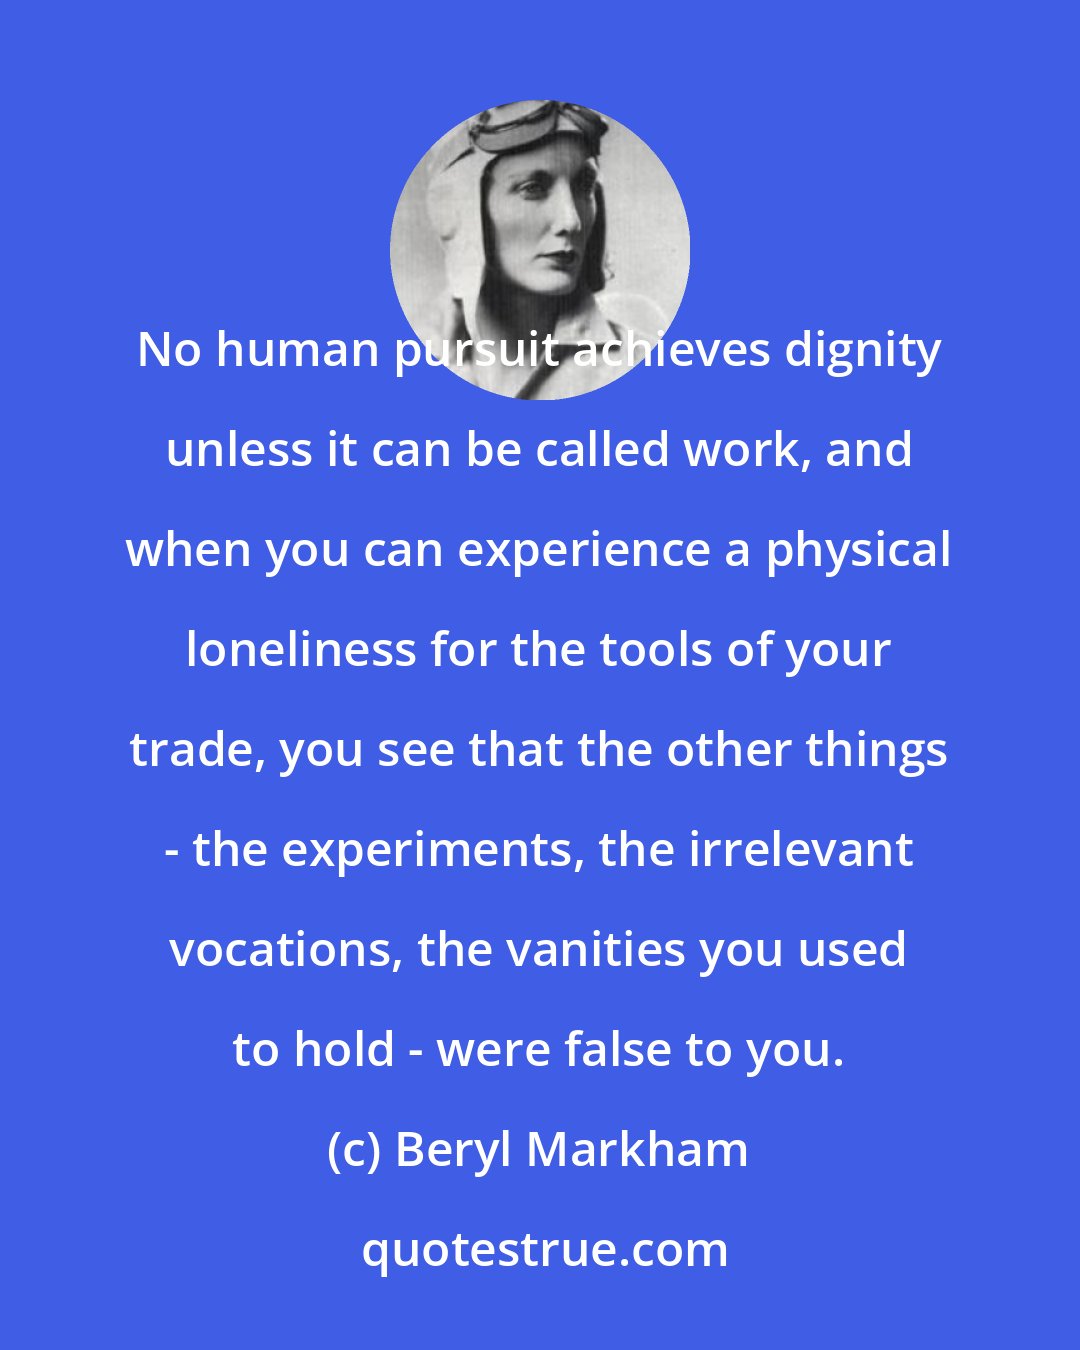 Beryl Markham: No human pursuit achieves dignity unless it can be called work, and when you can experience a physical loneliness for the tools of your trade, you see that the other things - the experiments, the irrelevant vocations, the vanities you used to hold - were false to you.